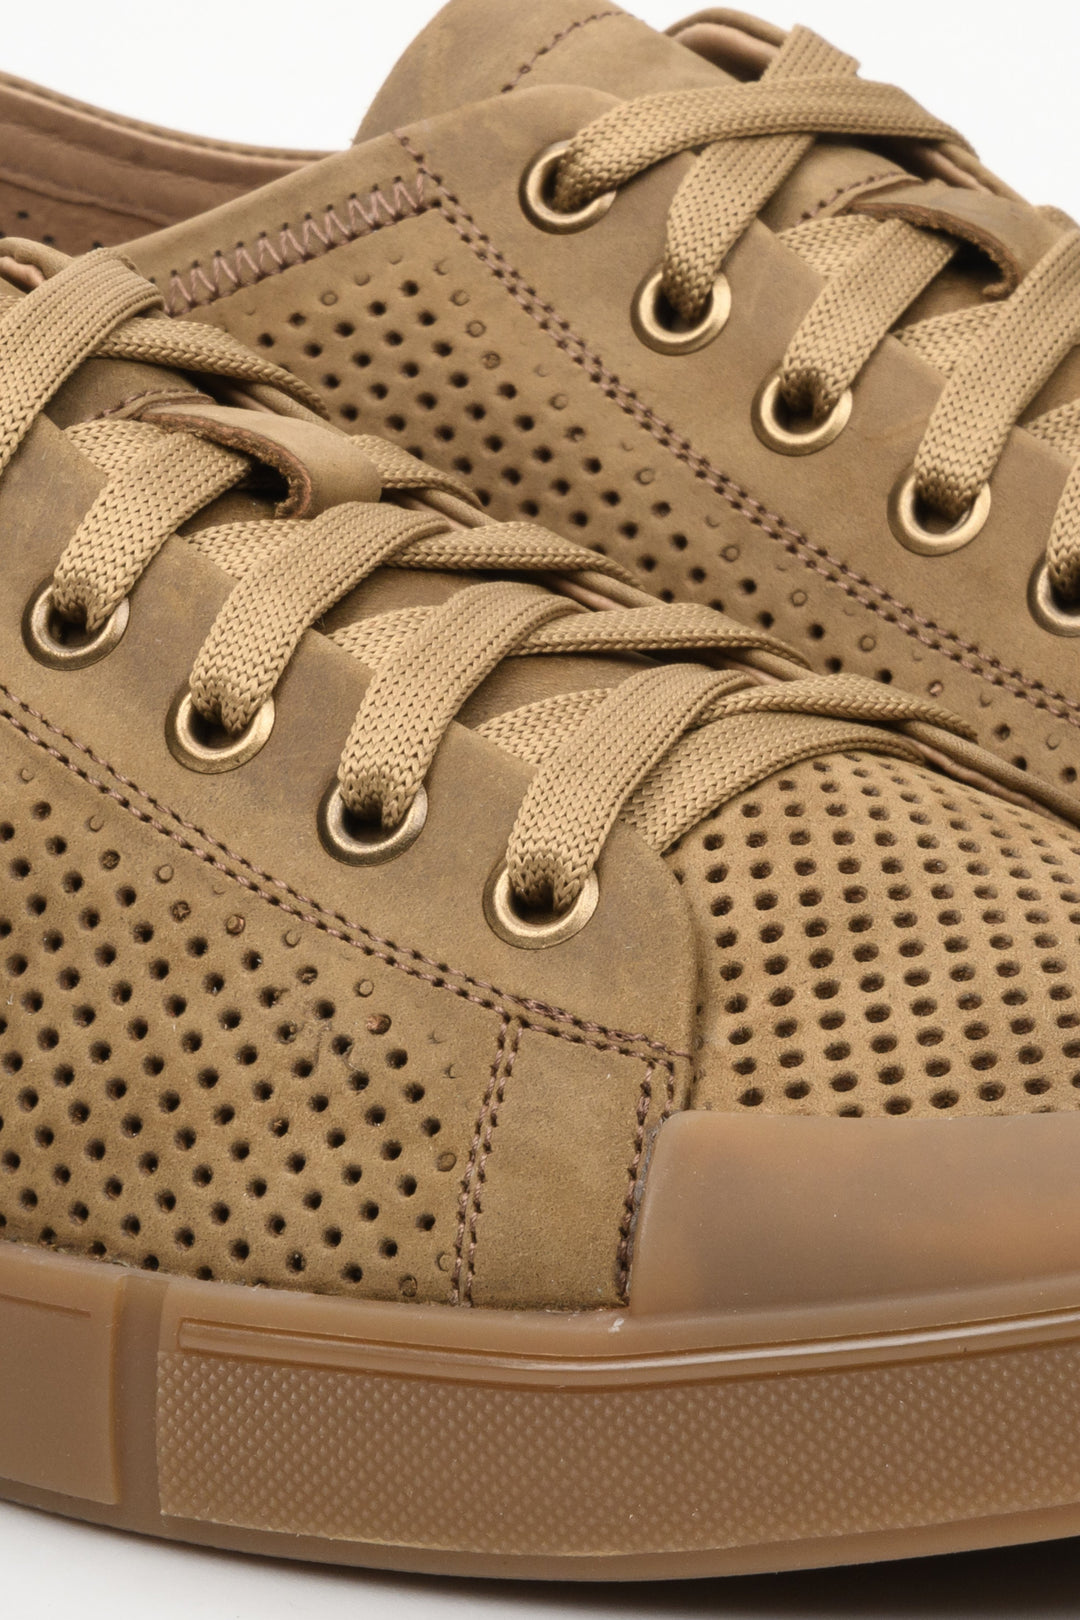 Men's sneakers made of brown genuine leather by Estro - close-up on the details.